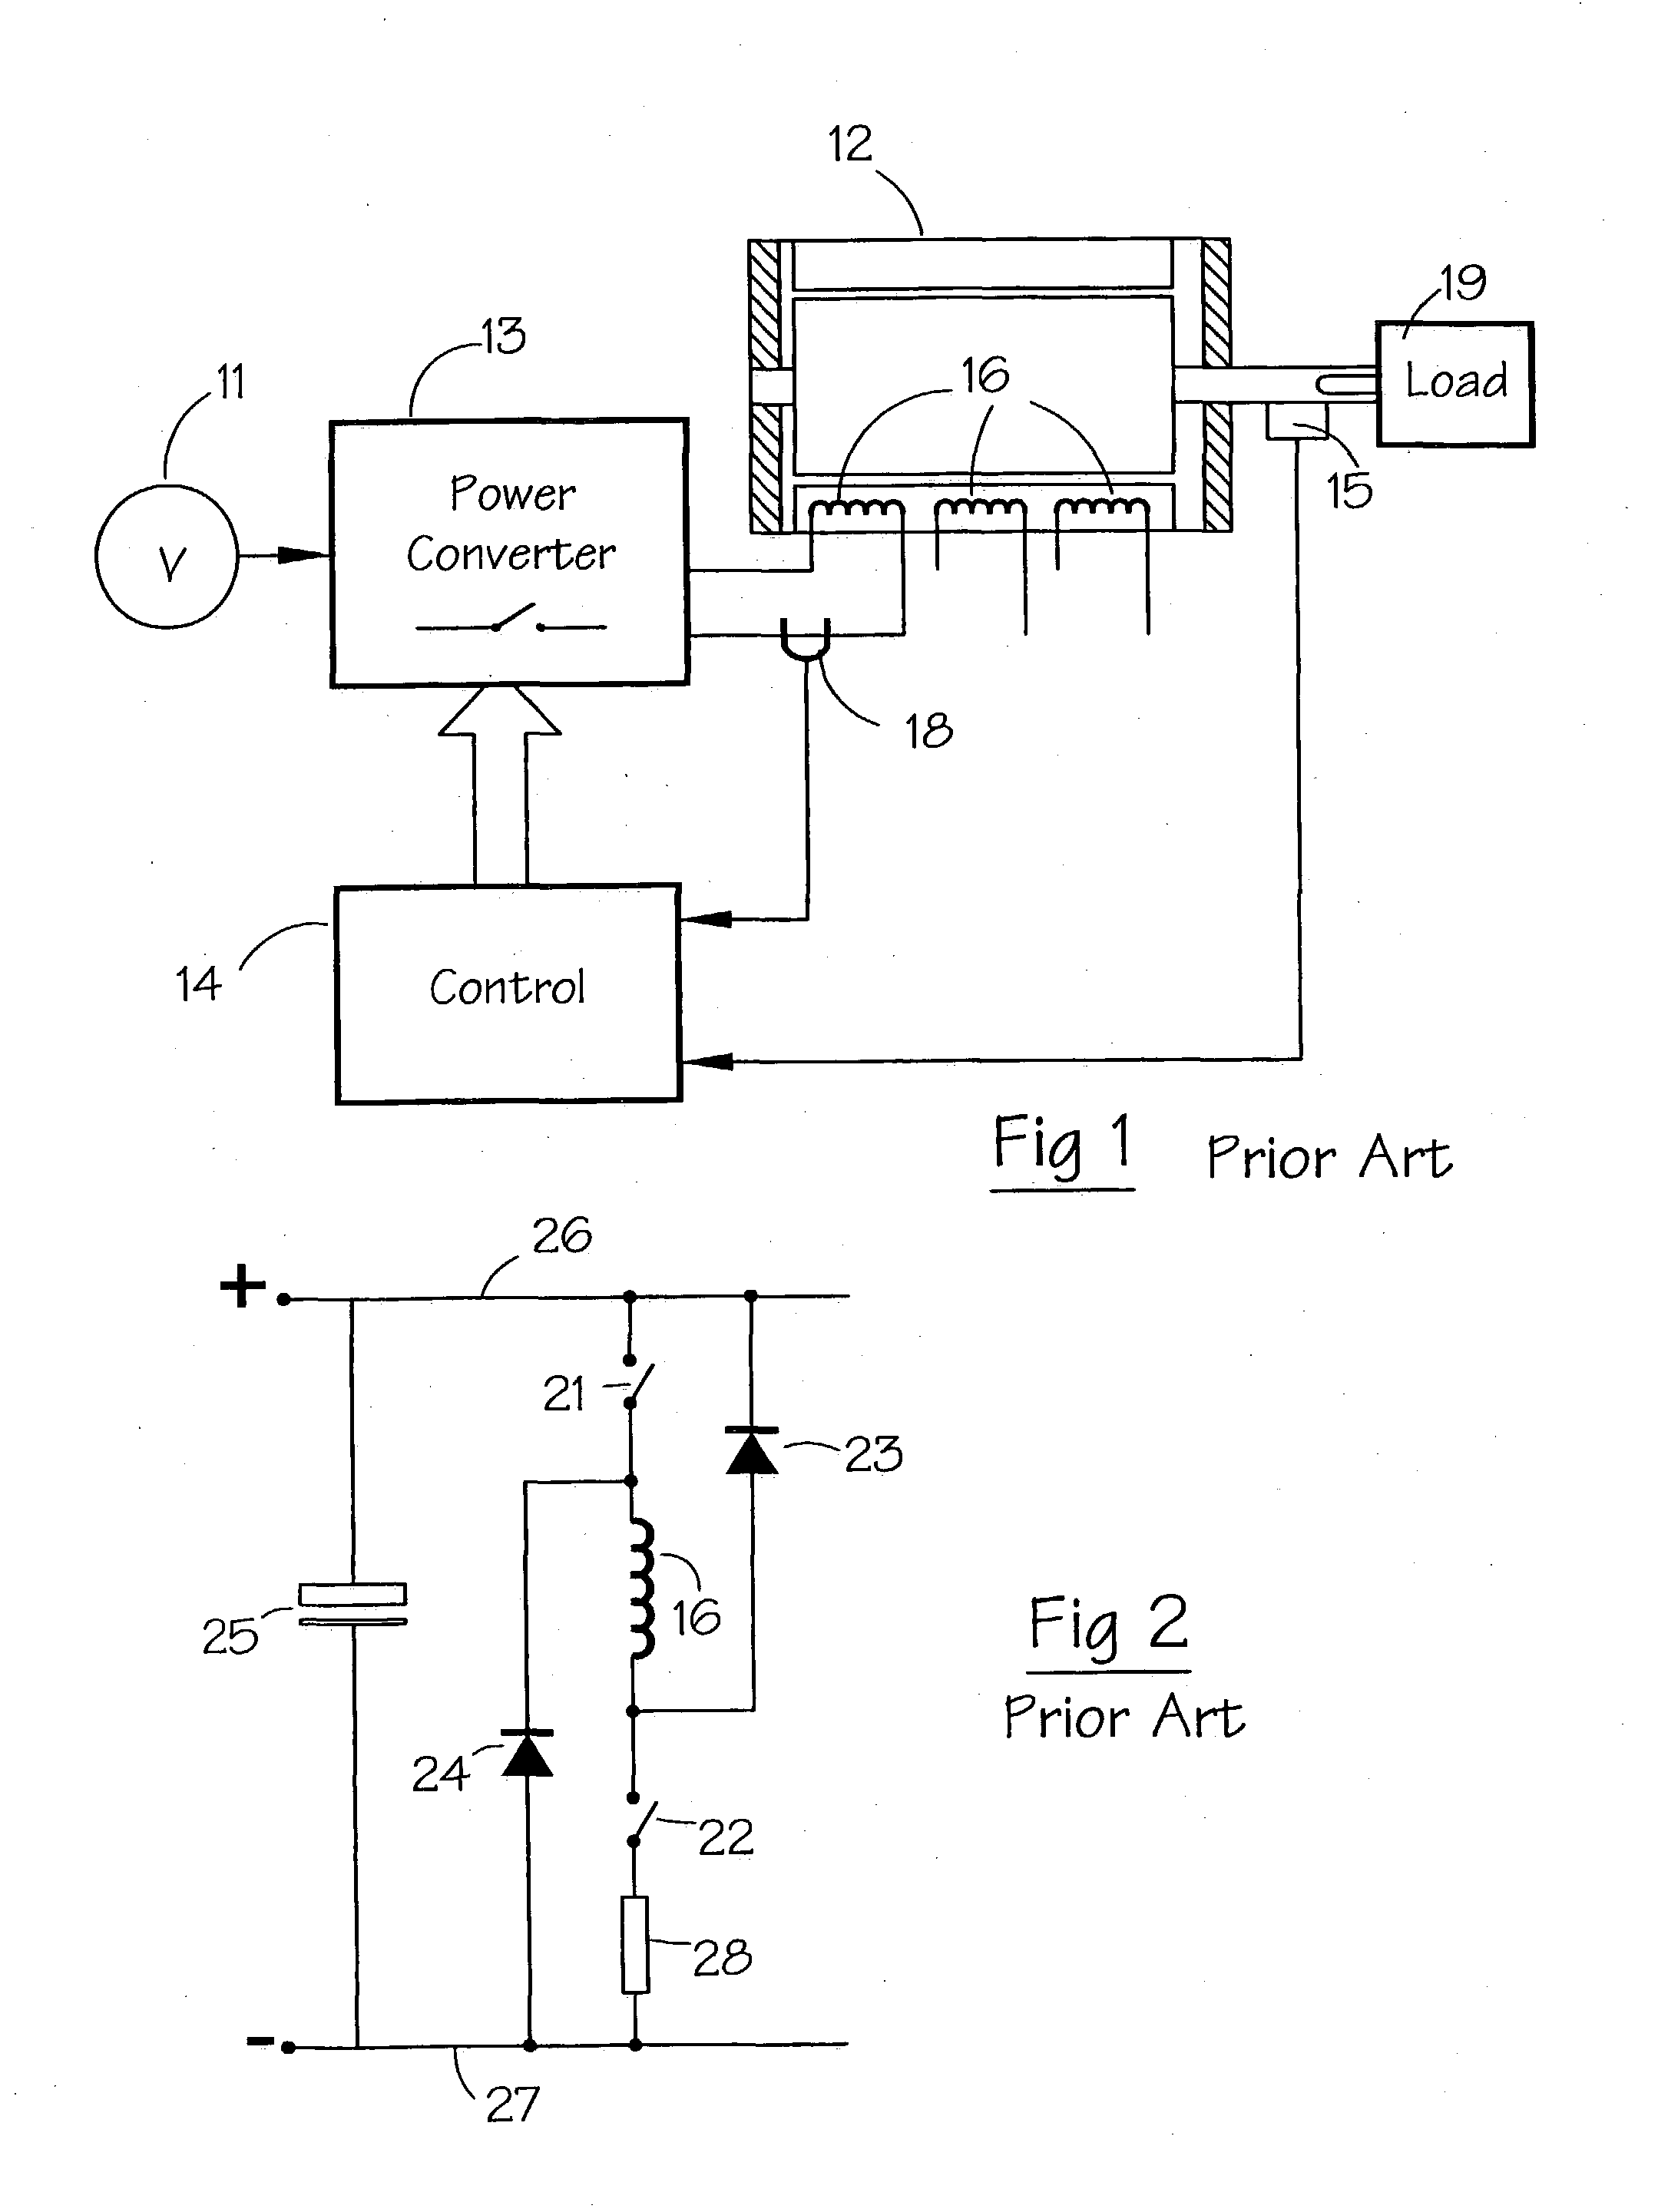 Control of a switched reluctance drive